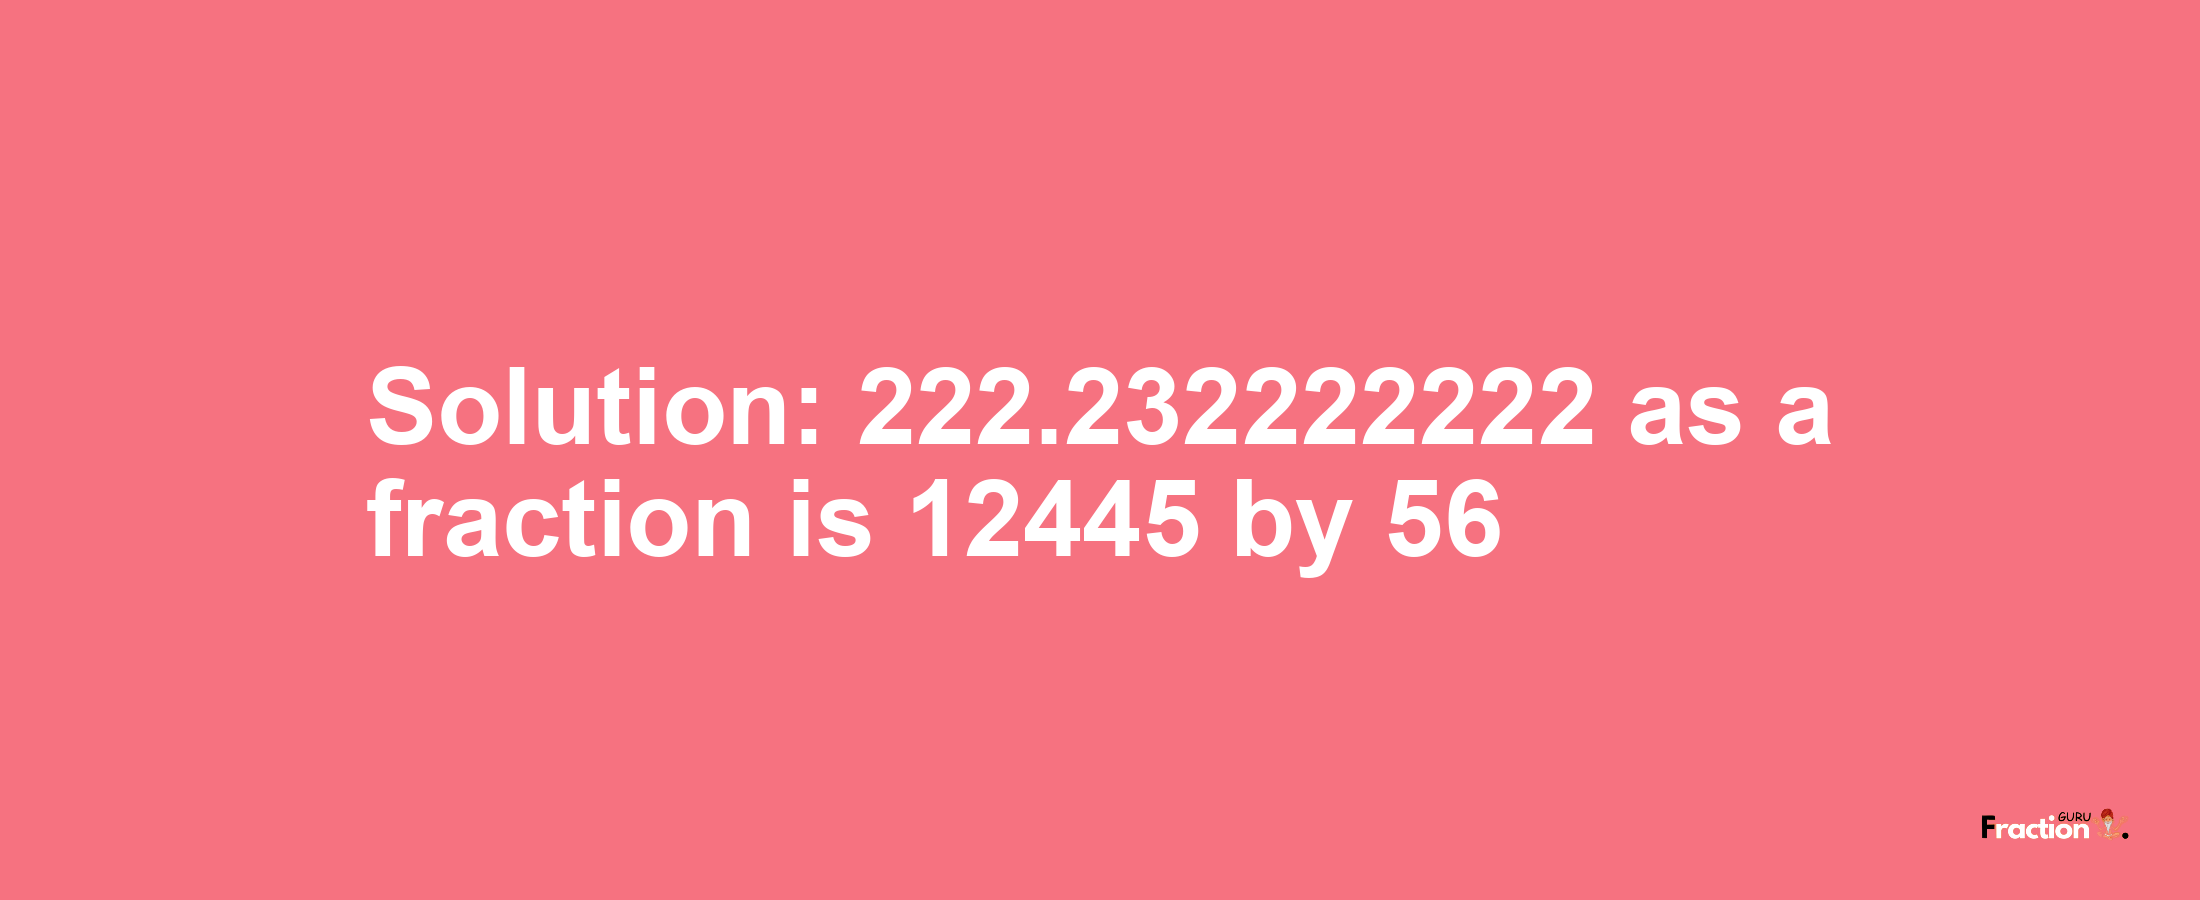 Solution:222.232222222 as a fraction is 12445/56